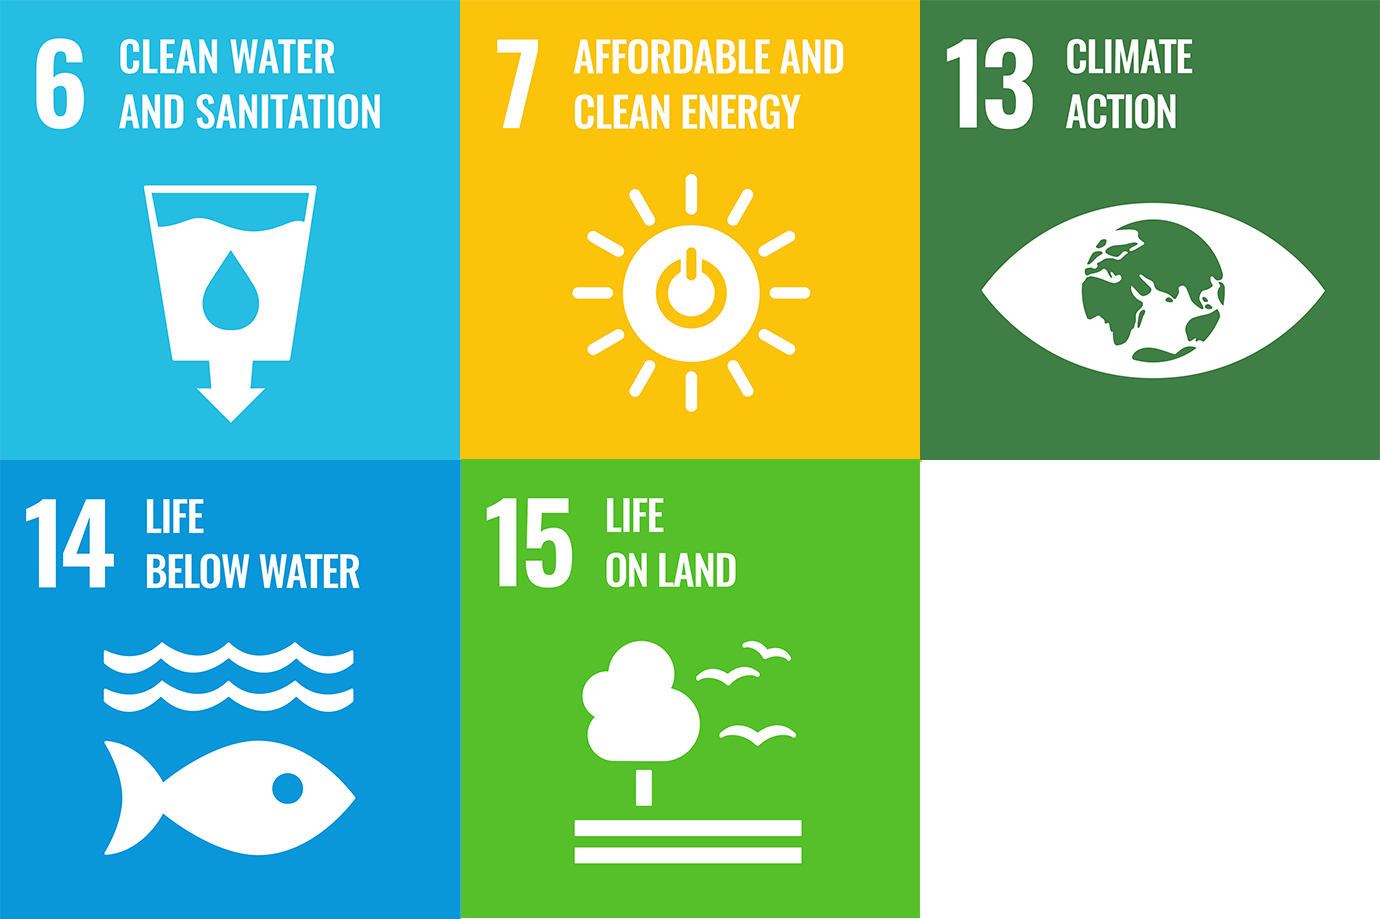 Five of the UN SDG Goals; clean water and sanitation, affordable and client energy, climate action, life below water, life on land.